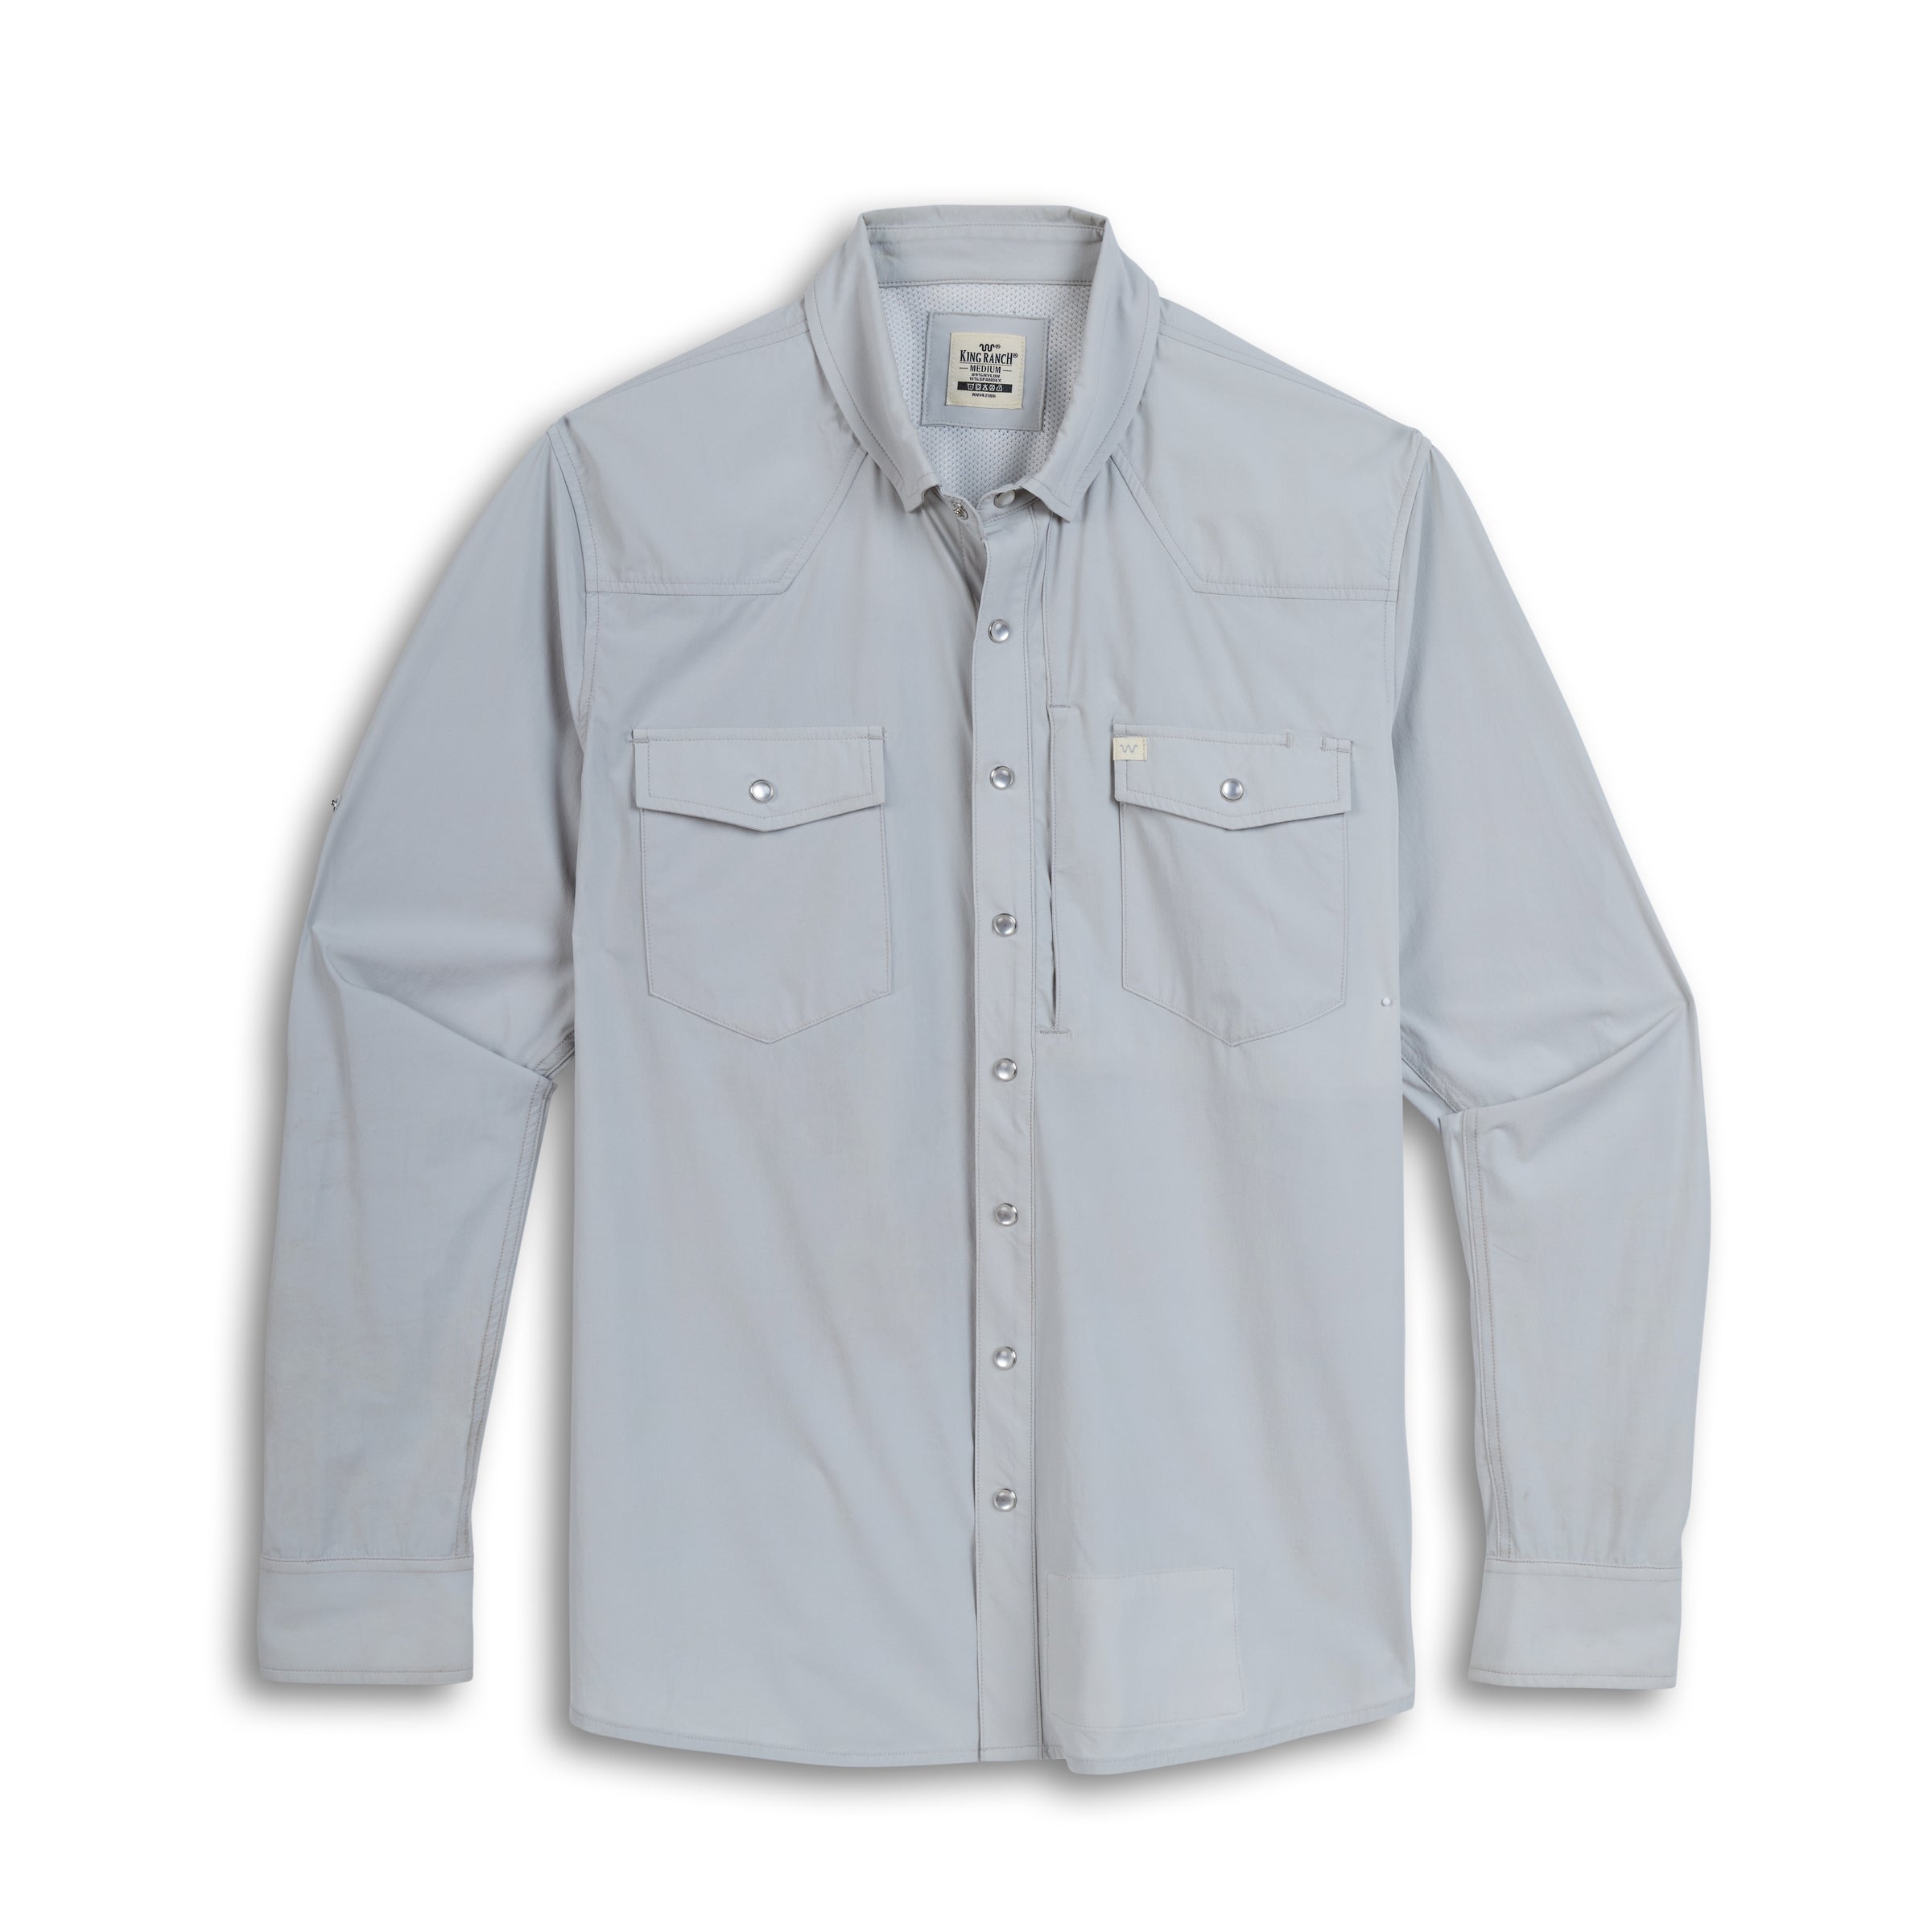 Men's Long Sleeves Ultimate Western Fishing Shirt | Color: Grey | Size: 3X by King Ranch Saddle Shop